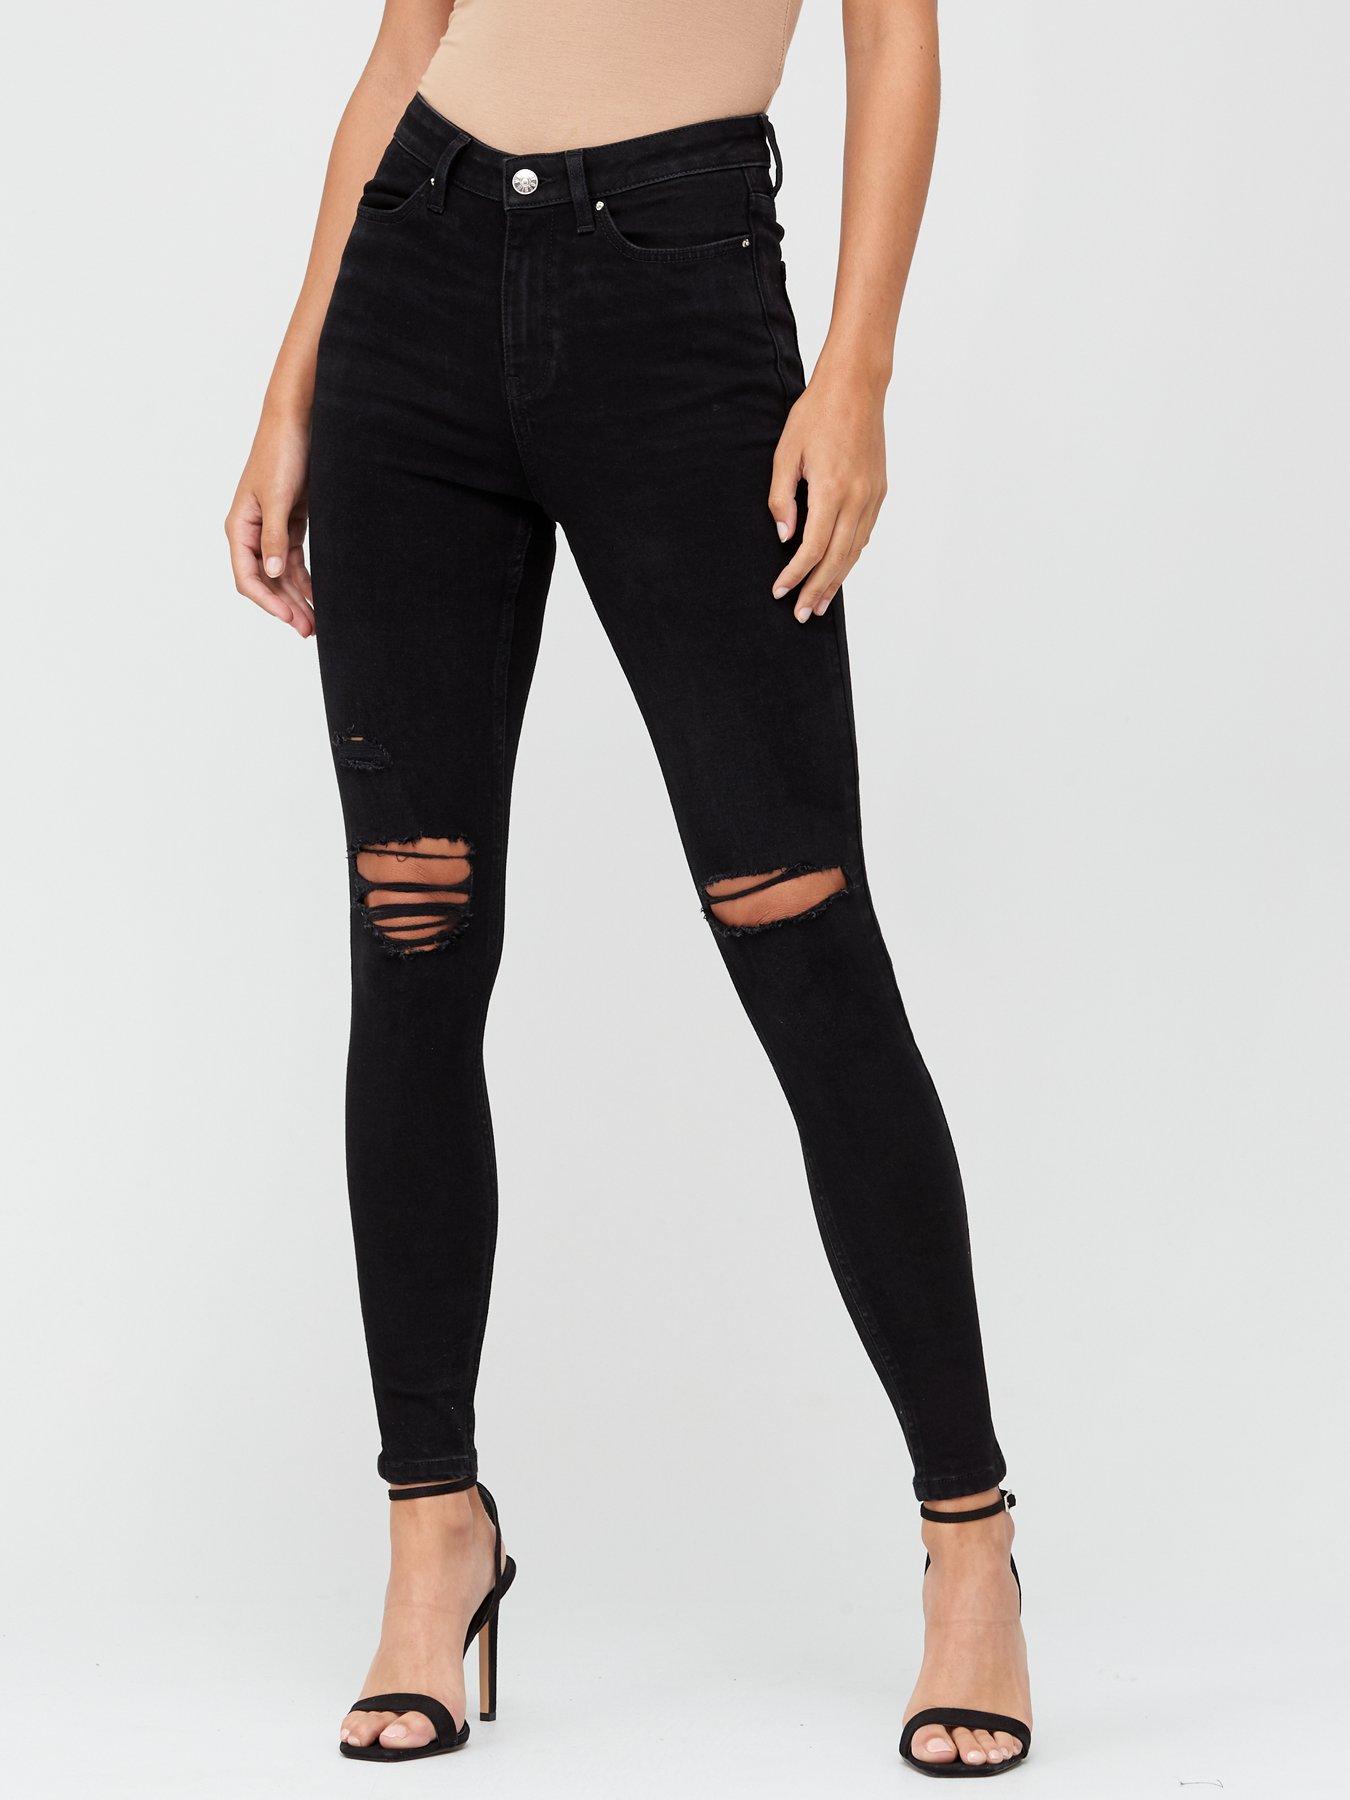 womens black ripped jeans uk